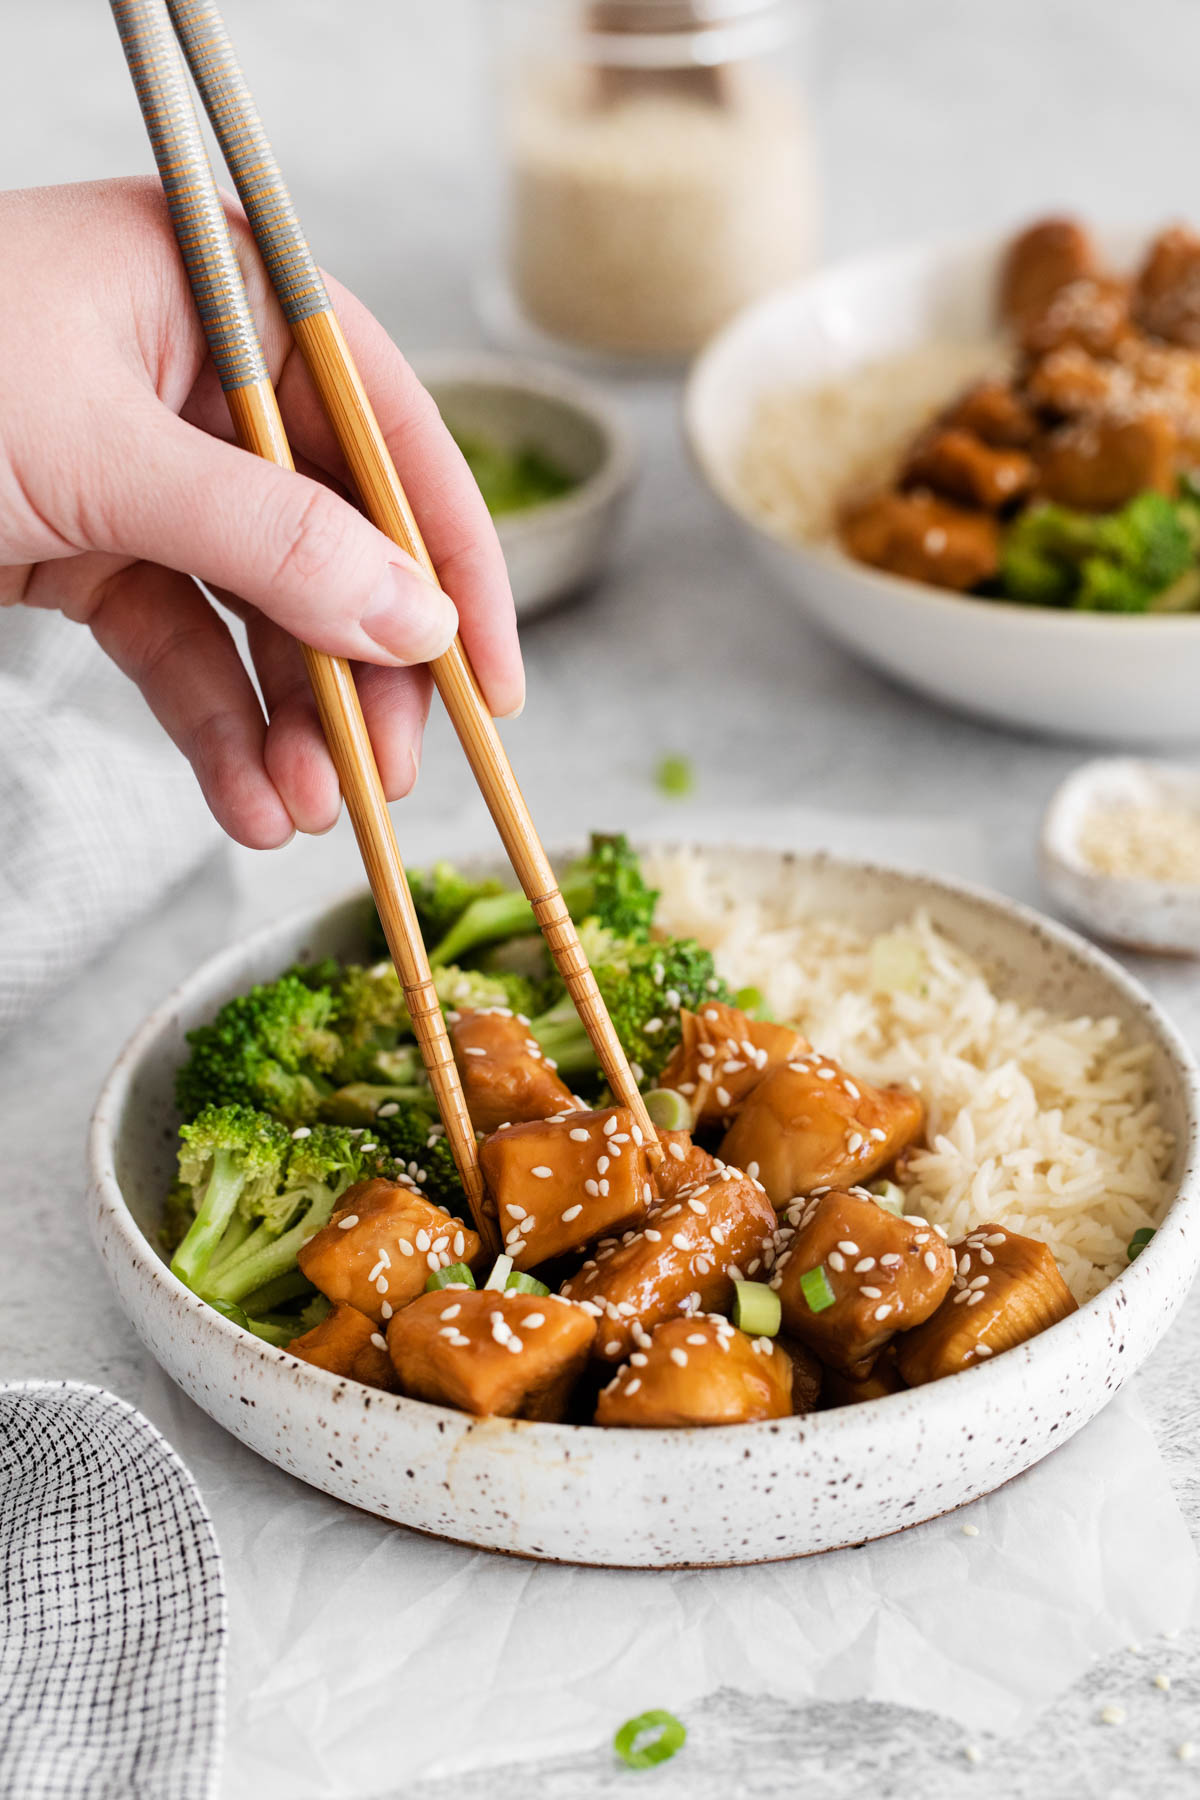 A bowl of teriyaki chicken, broccoli and rice is displayed in the foreground. Hands holding chopsticks are reaching for a piece of chicken. 